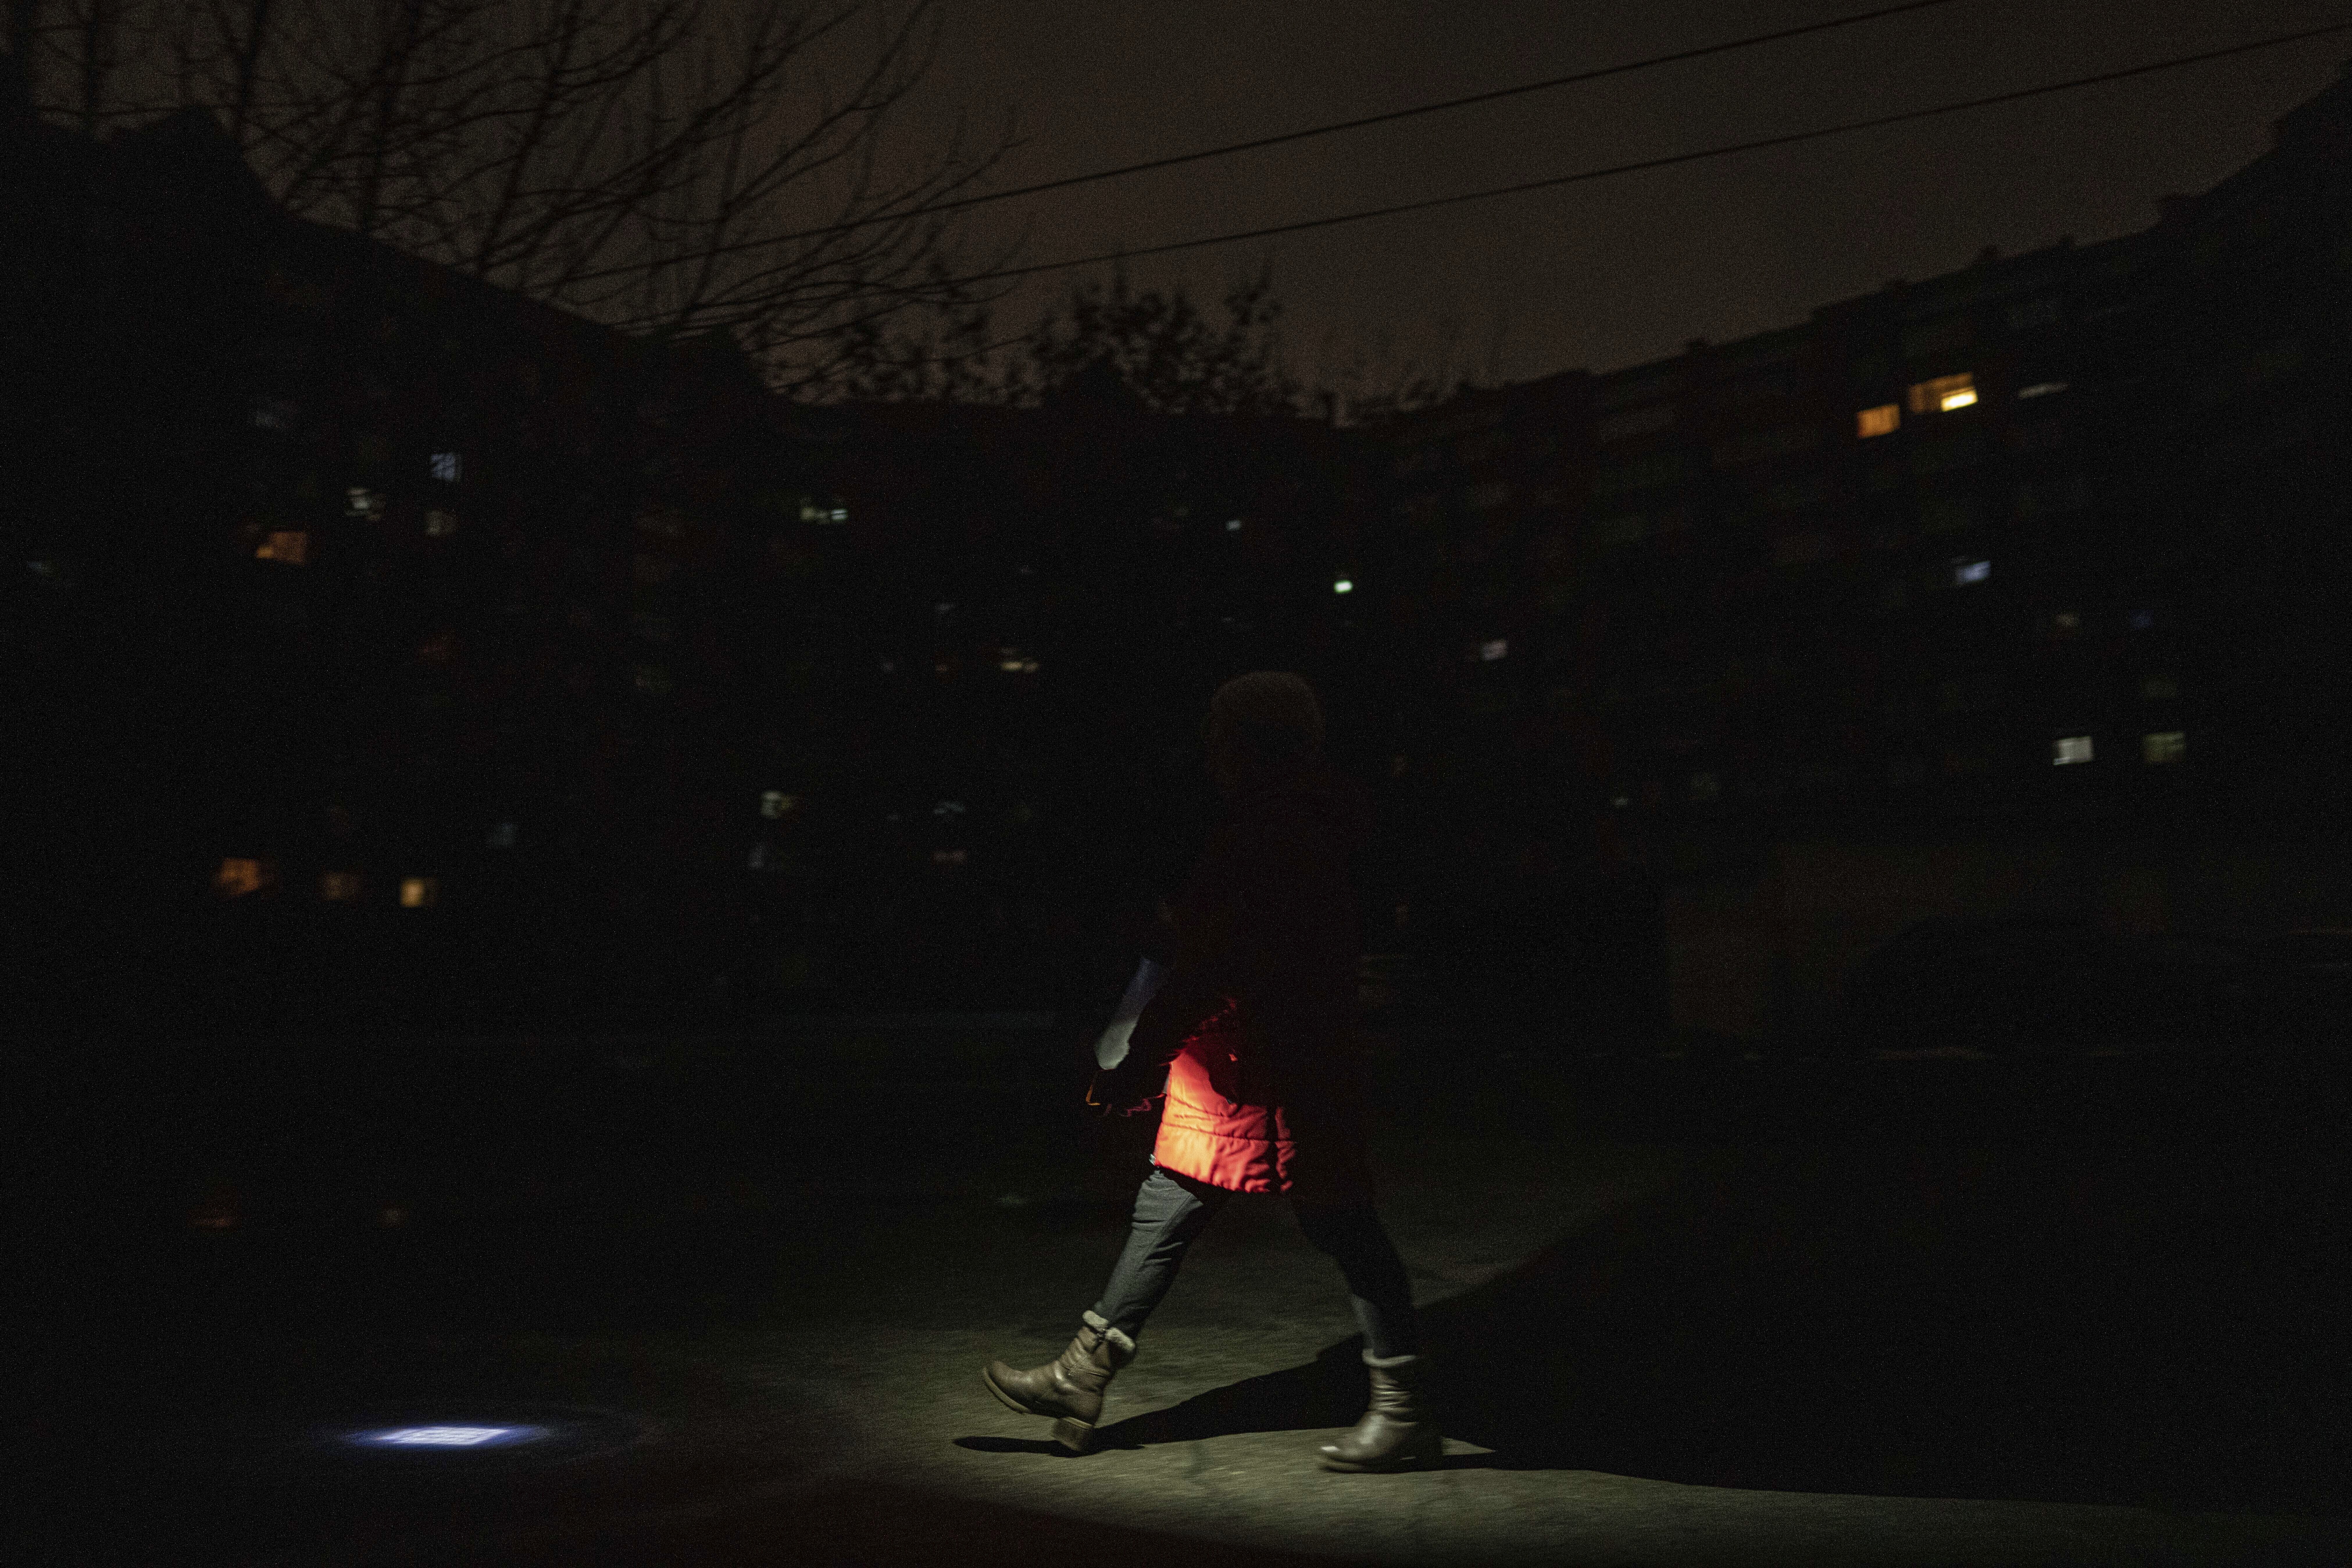 A woman illuminates the street with a flashlight during a power outage in kyiv, Ukraine, on Feb. 3, 2023. (AP Photo/Evgeniy Maloletka)